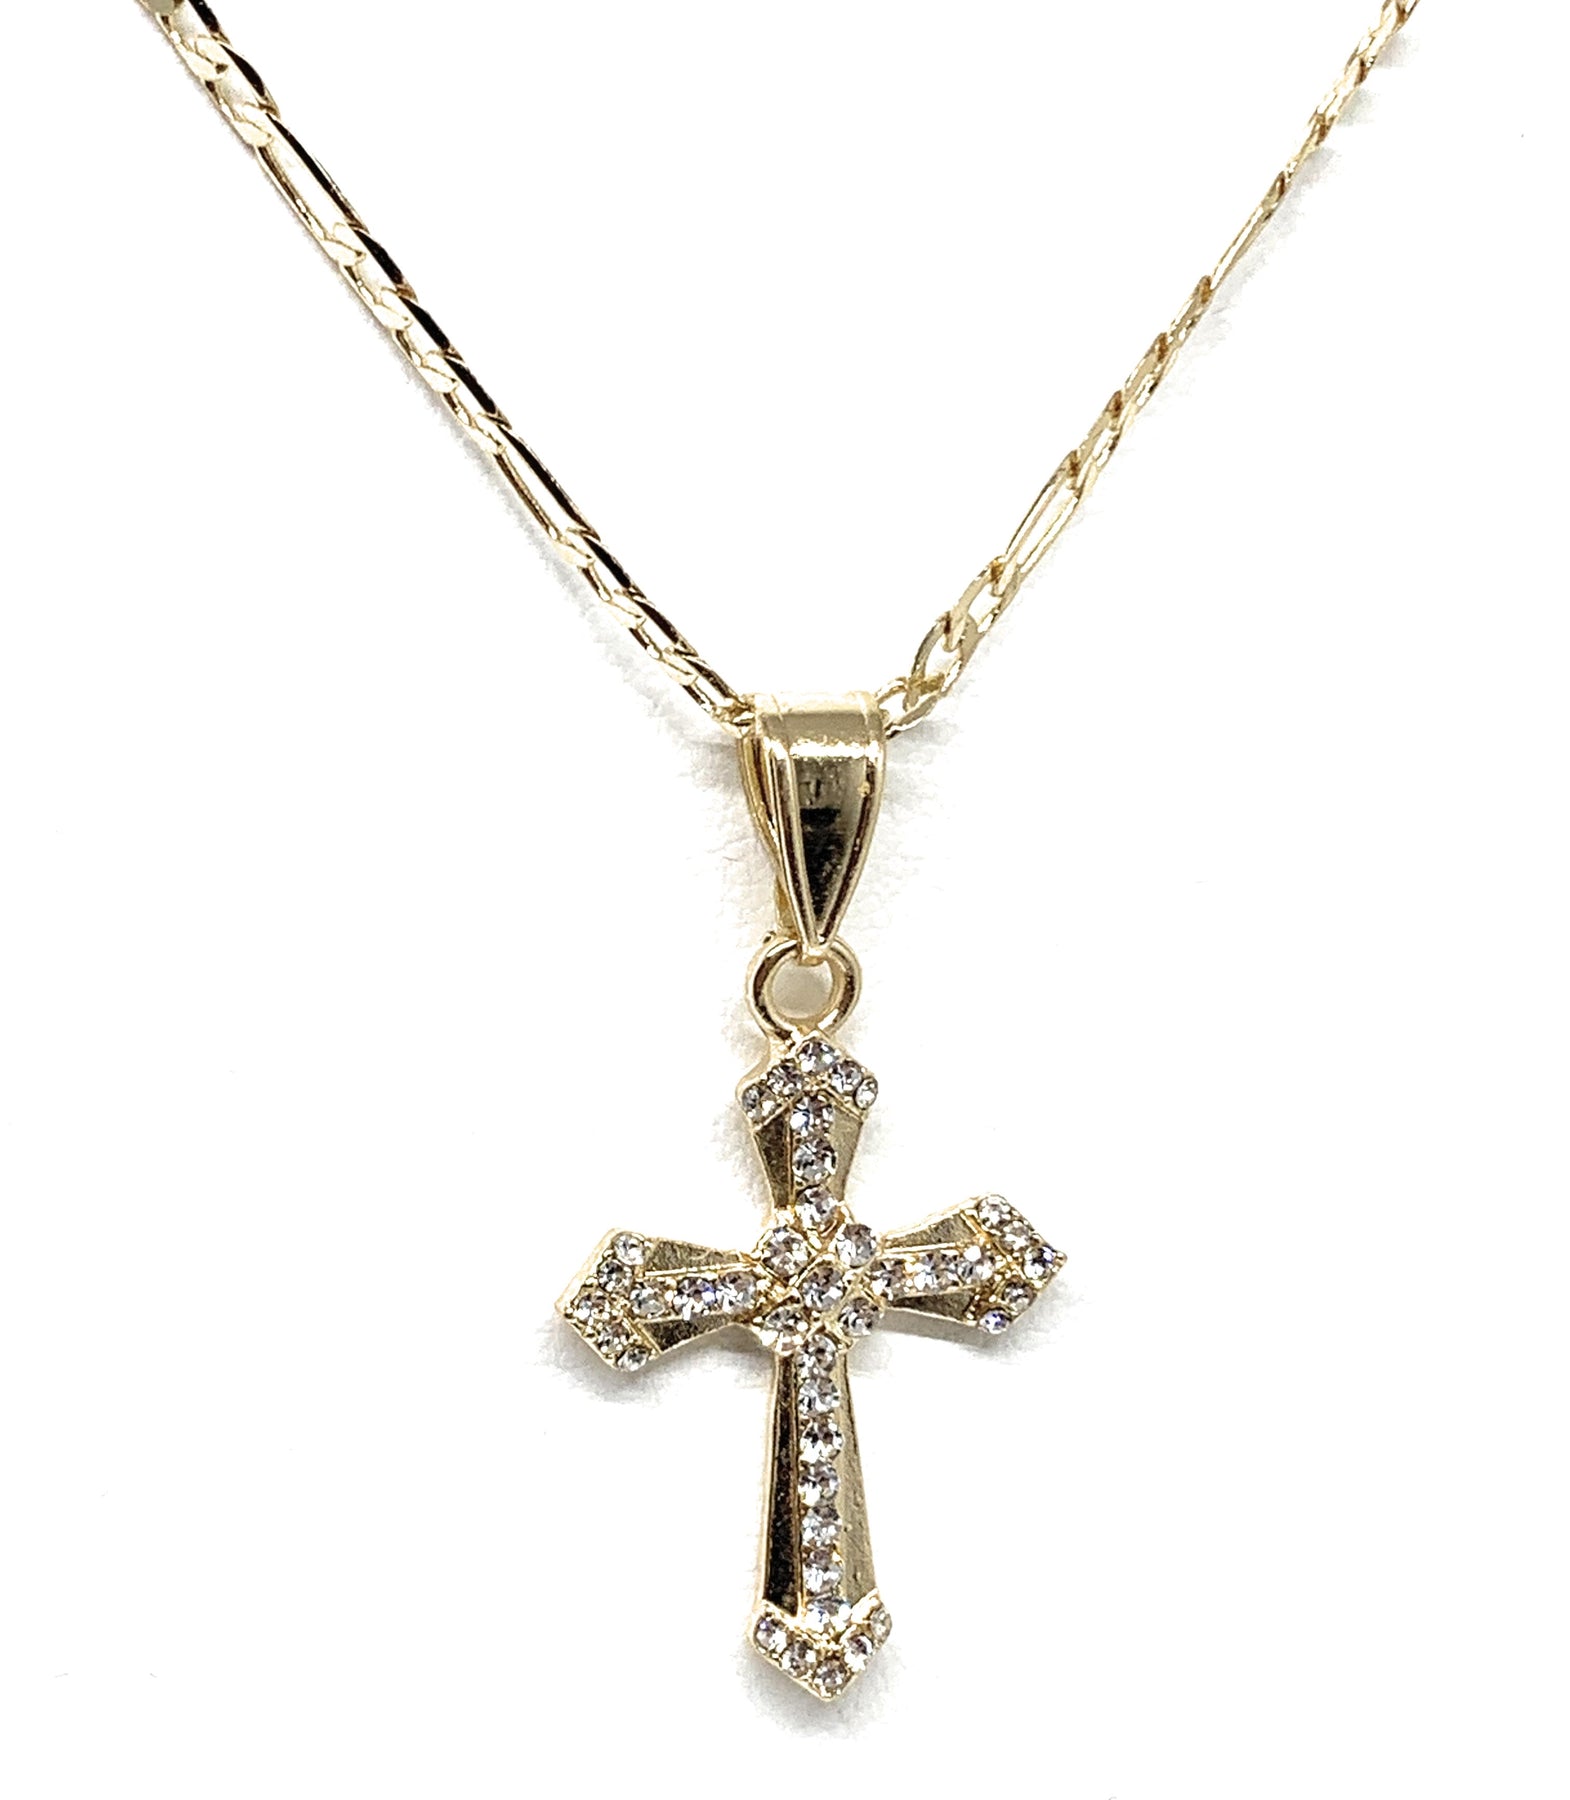 Gold plated cross necklace - The Grecian